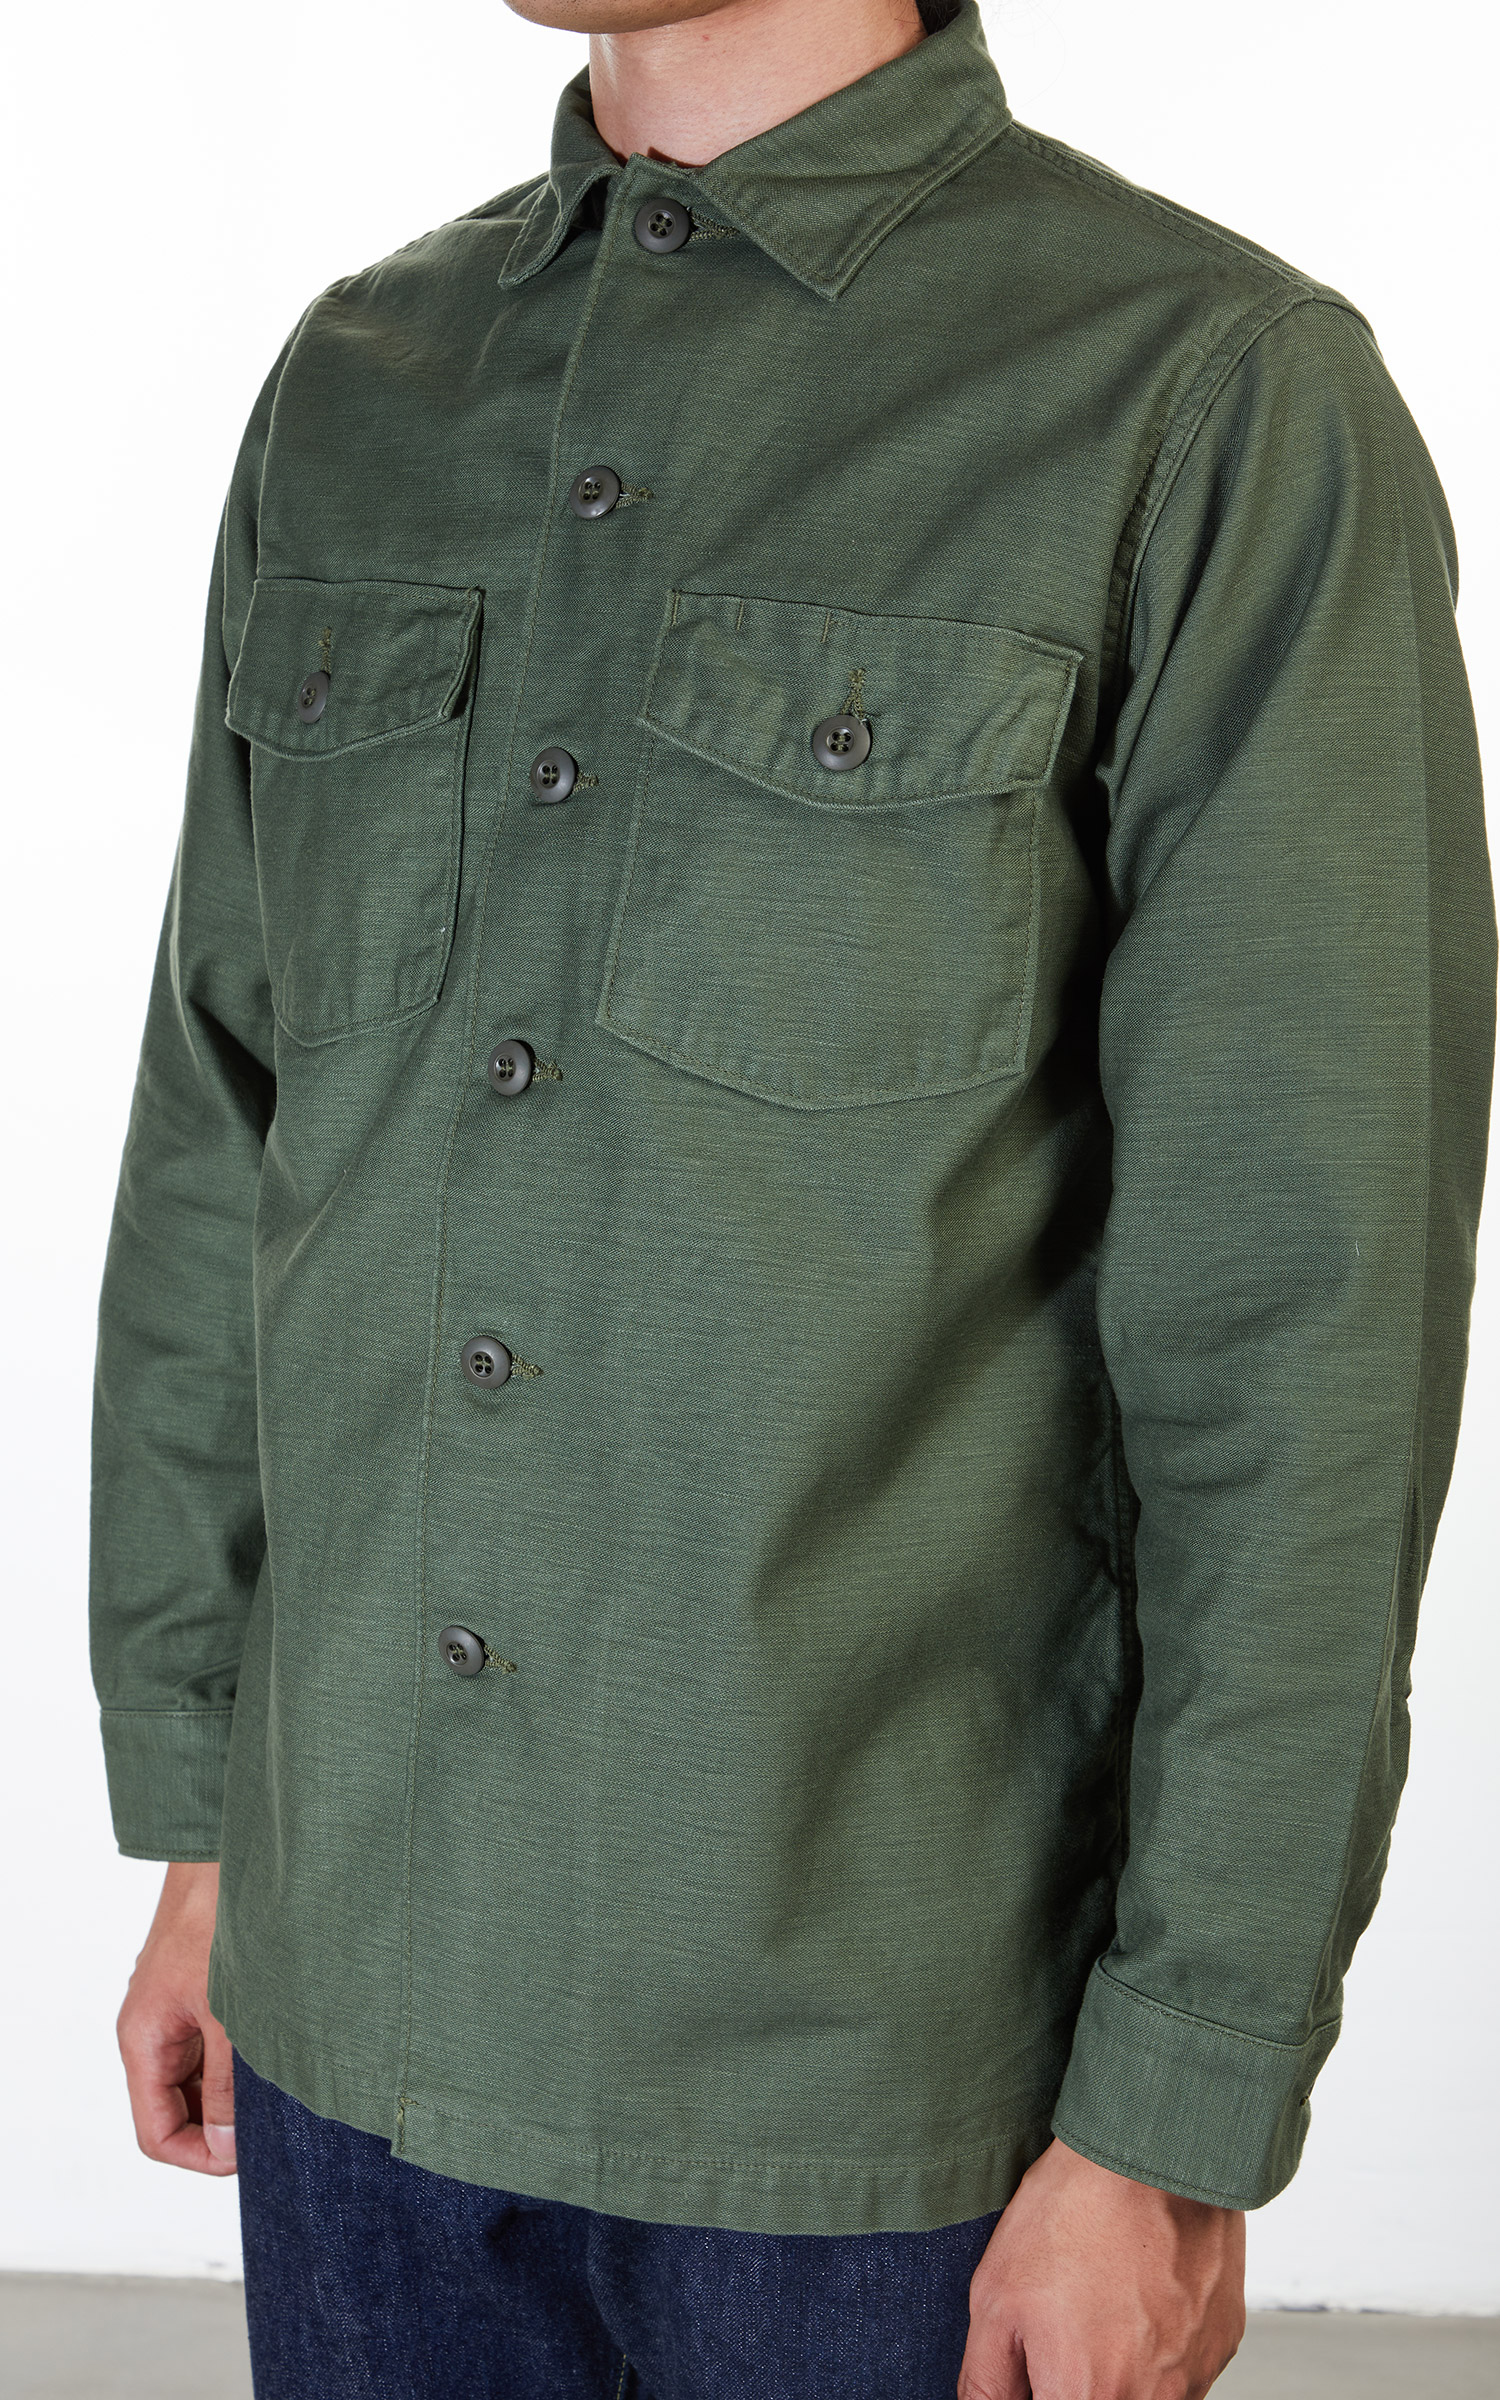 OrSlow US Army Fatigue Shirt Army Green | Cultizm